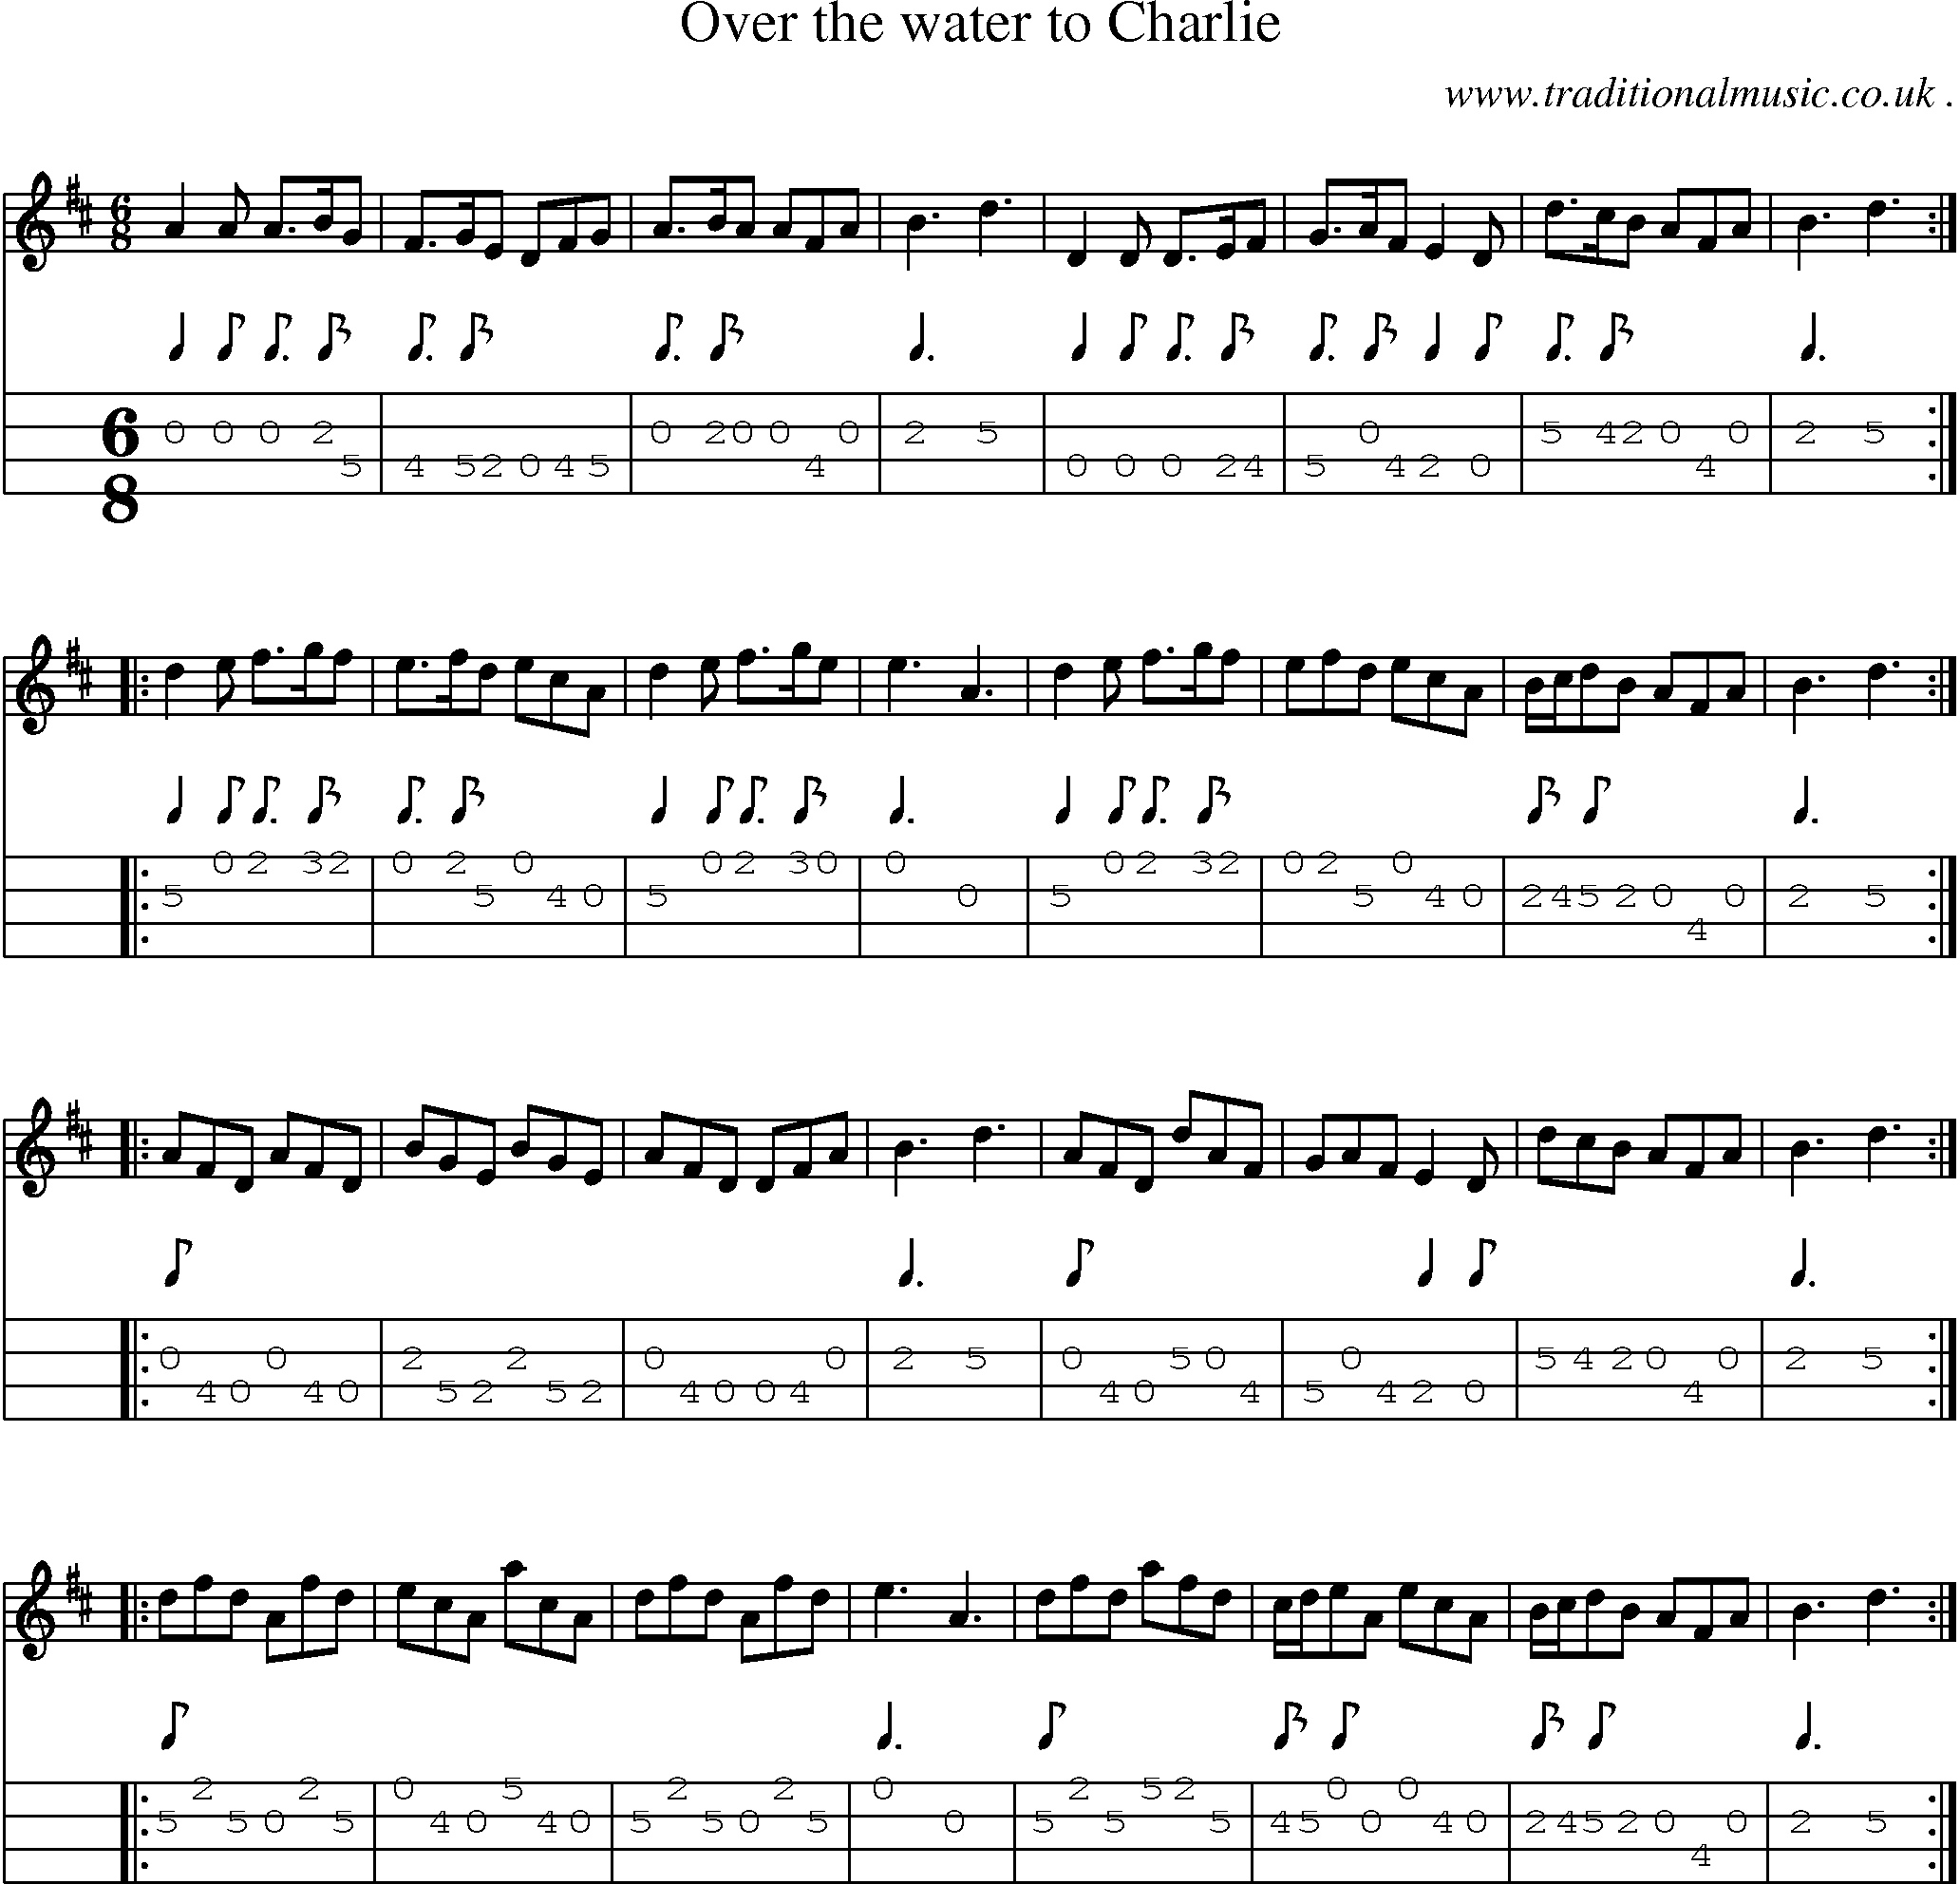 Sheet-music  score, Chords and Mandolin Tabs for Over The Water To Charlie